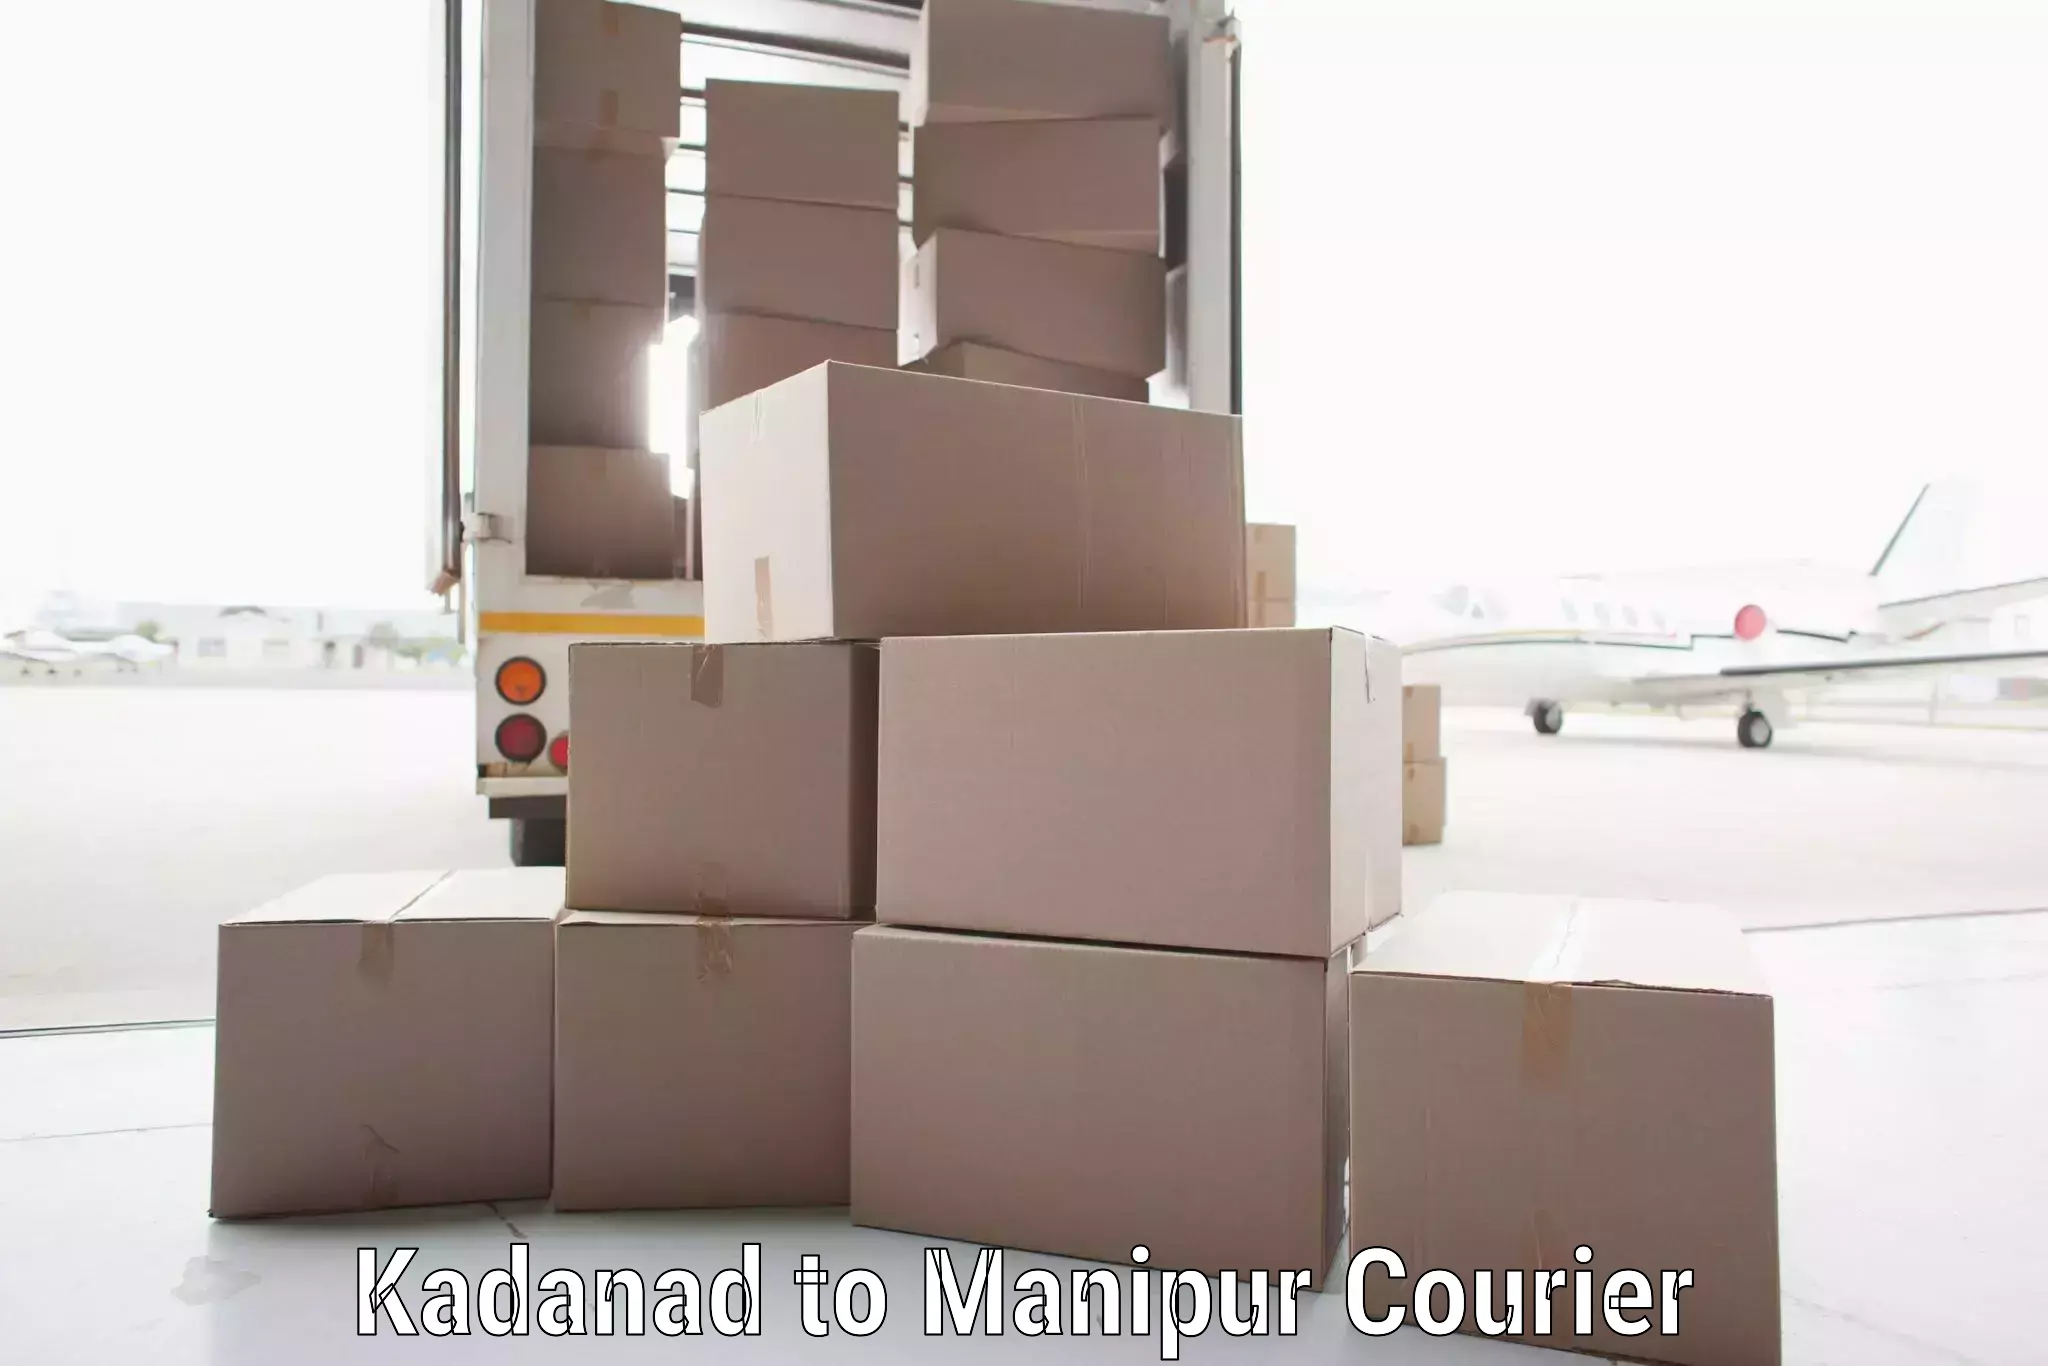 End-to-end delivery Kadanad to Manipur